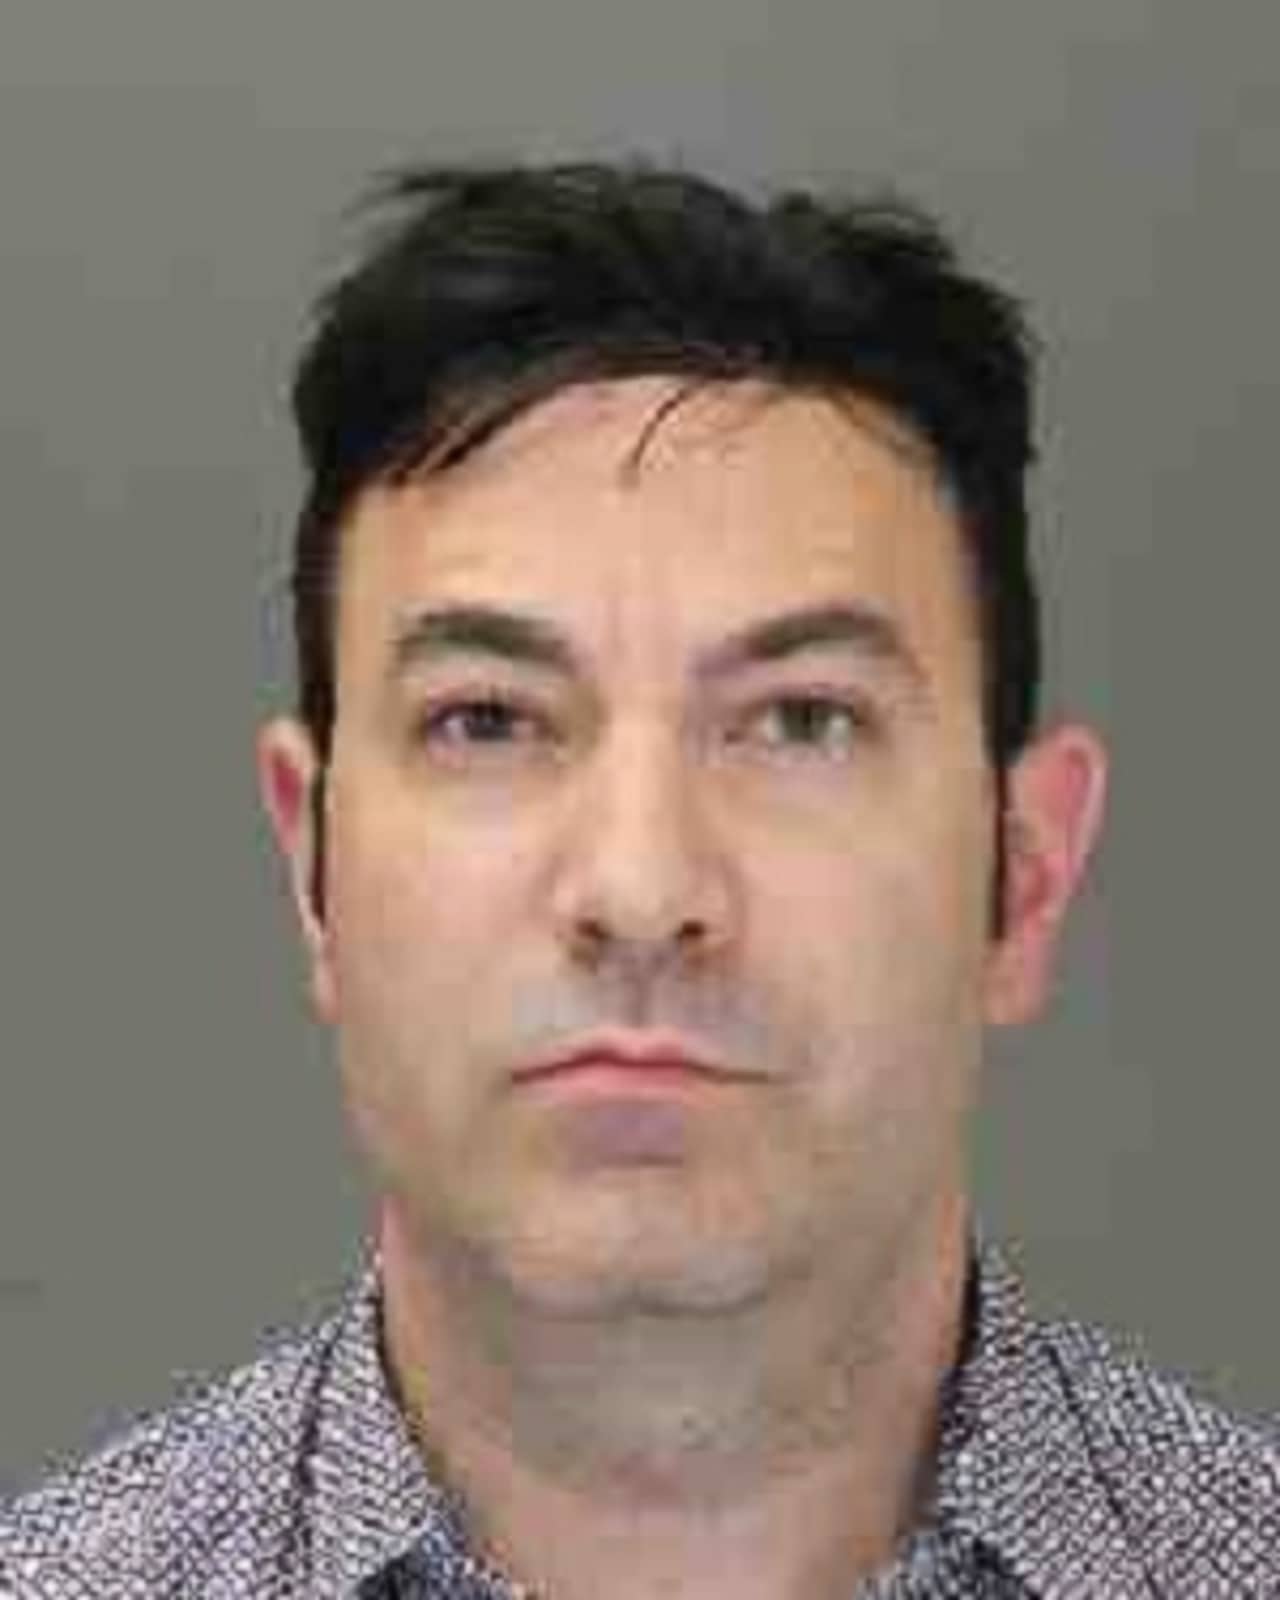 Ira Bernstein, a Ramapo podiatrist charged in a murder-for-hire plot, was released on bond from the Rockland County Jail on Friday afternoon.